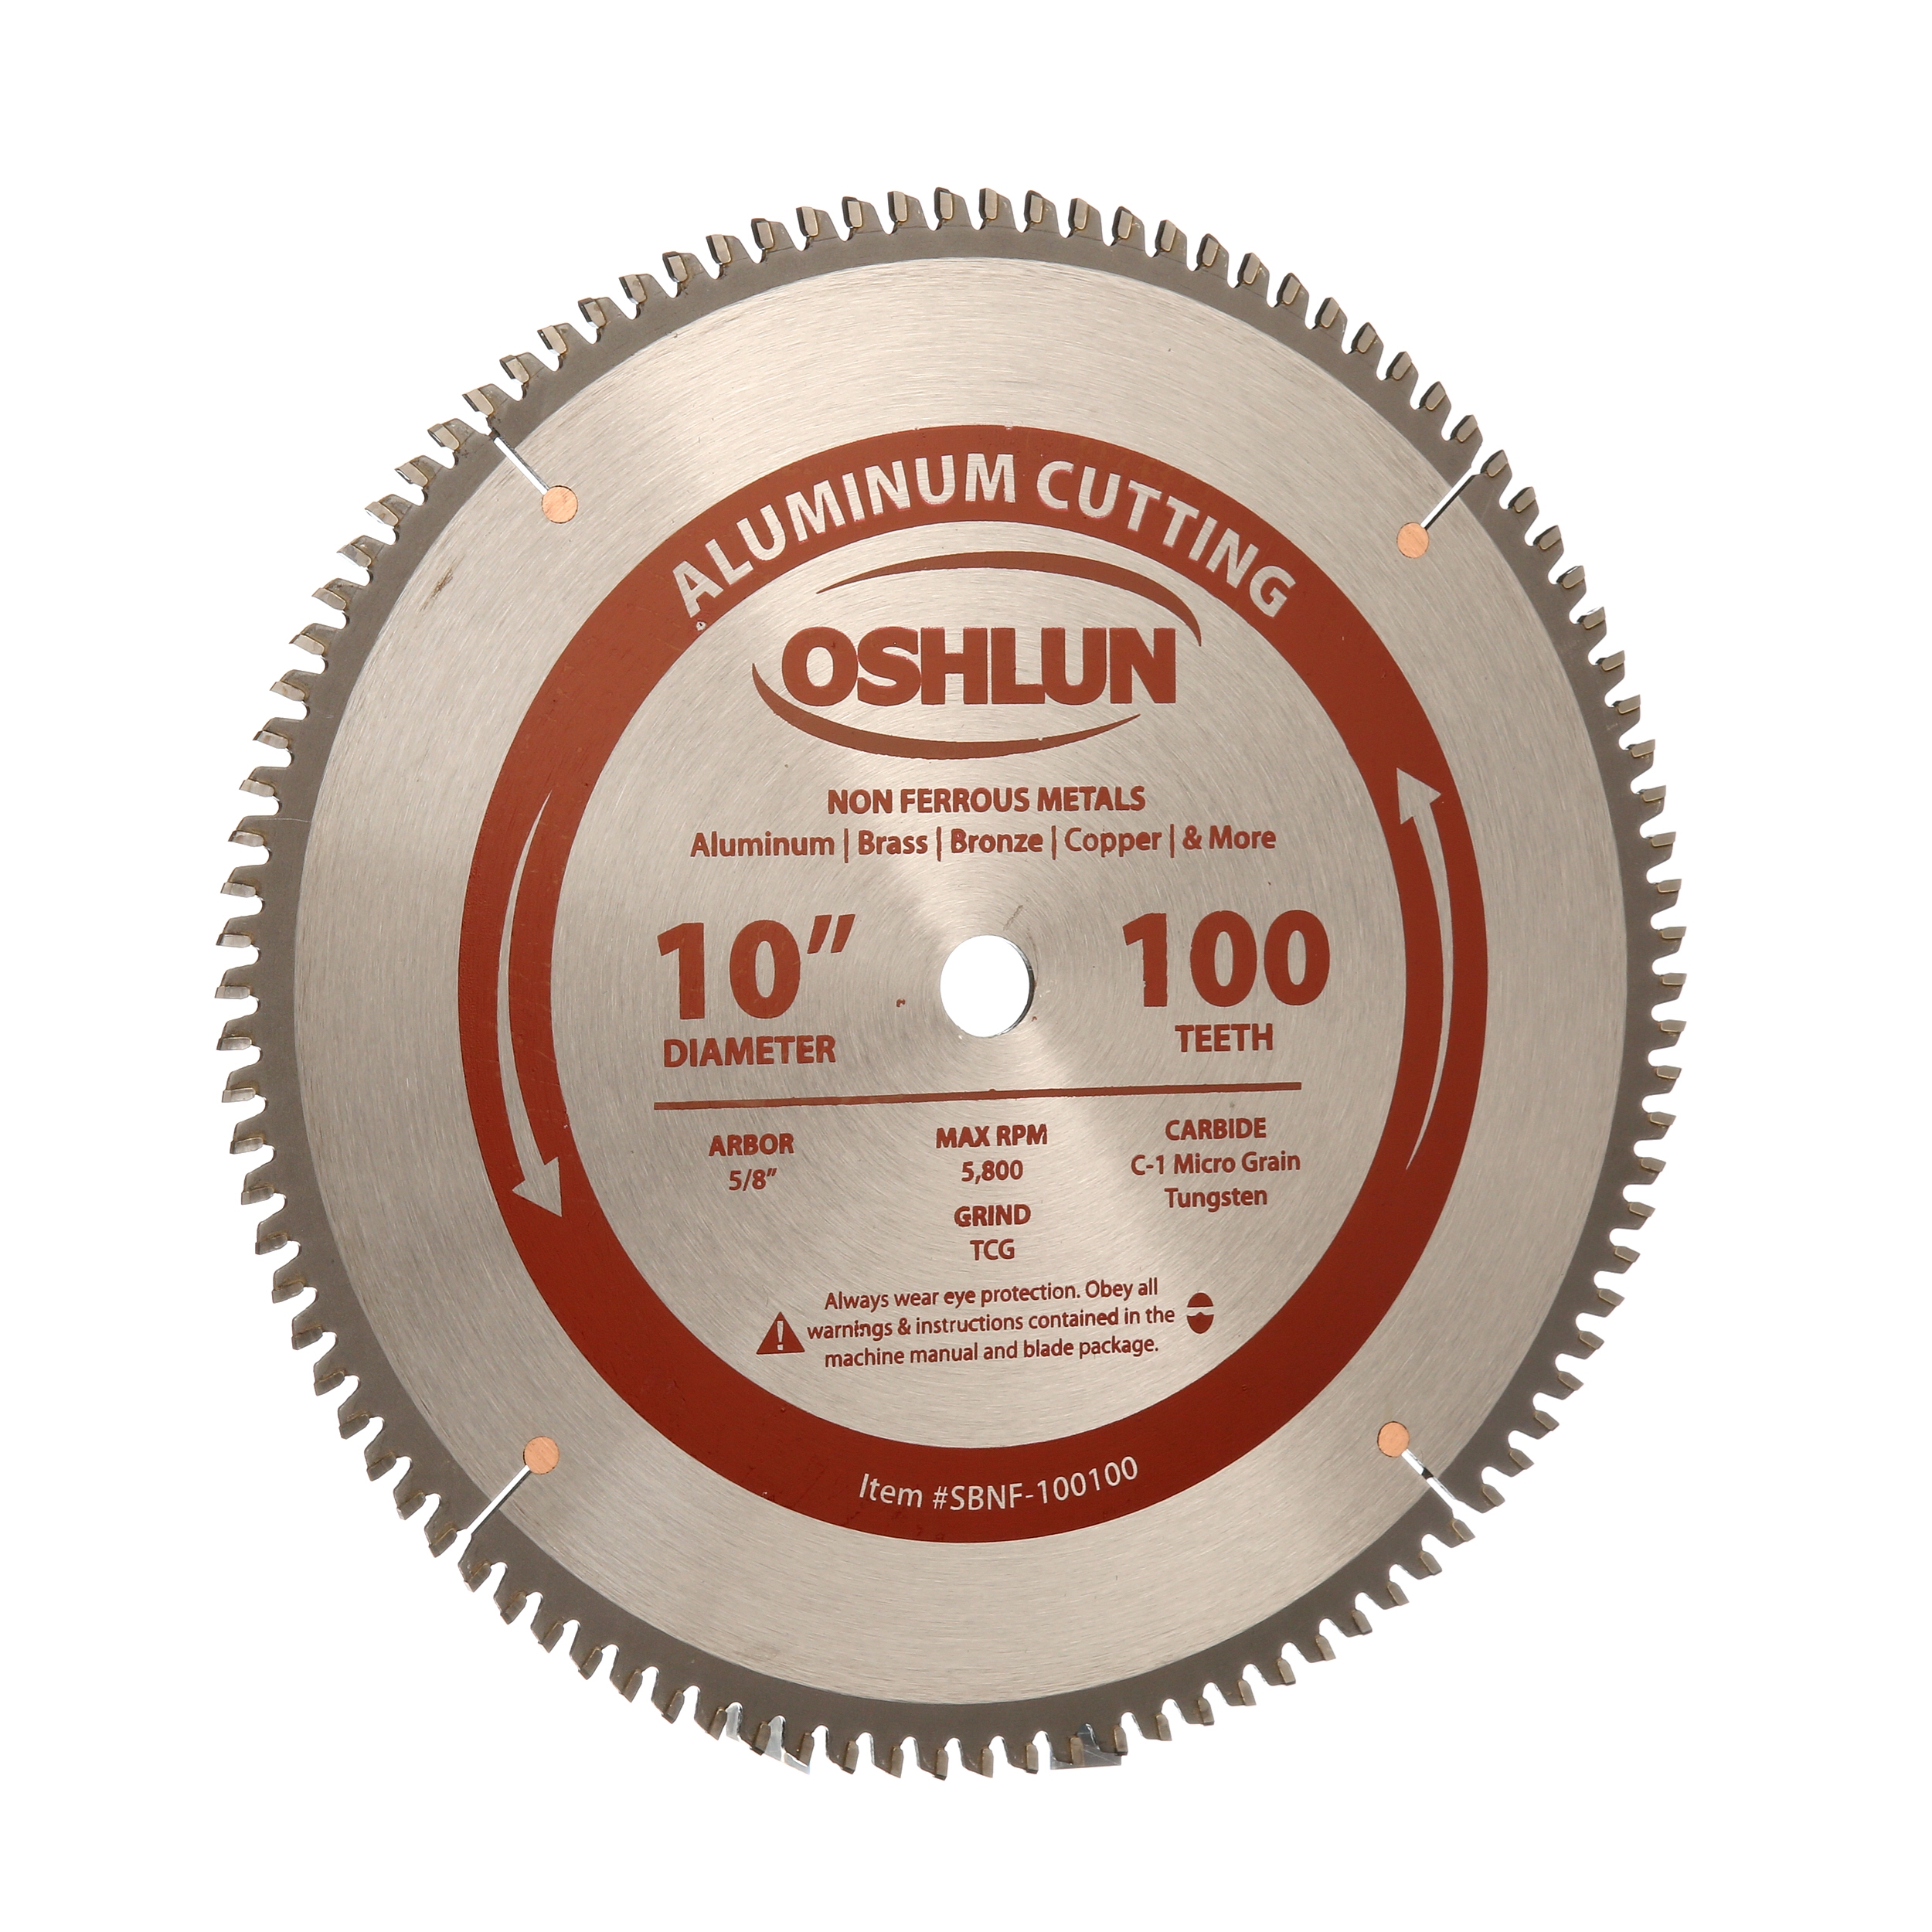 Oshlun SBNF-100100 10-Inch 100 Tooth TCG Saw Blade with 8-Inch Arbor for Aluminum and Non Ferrous Metals - 4